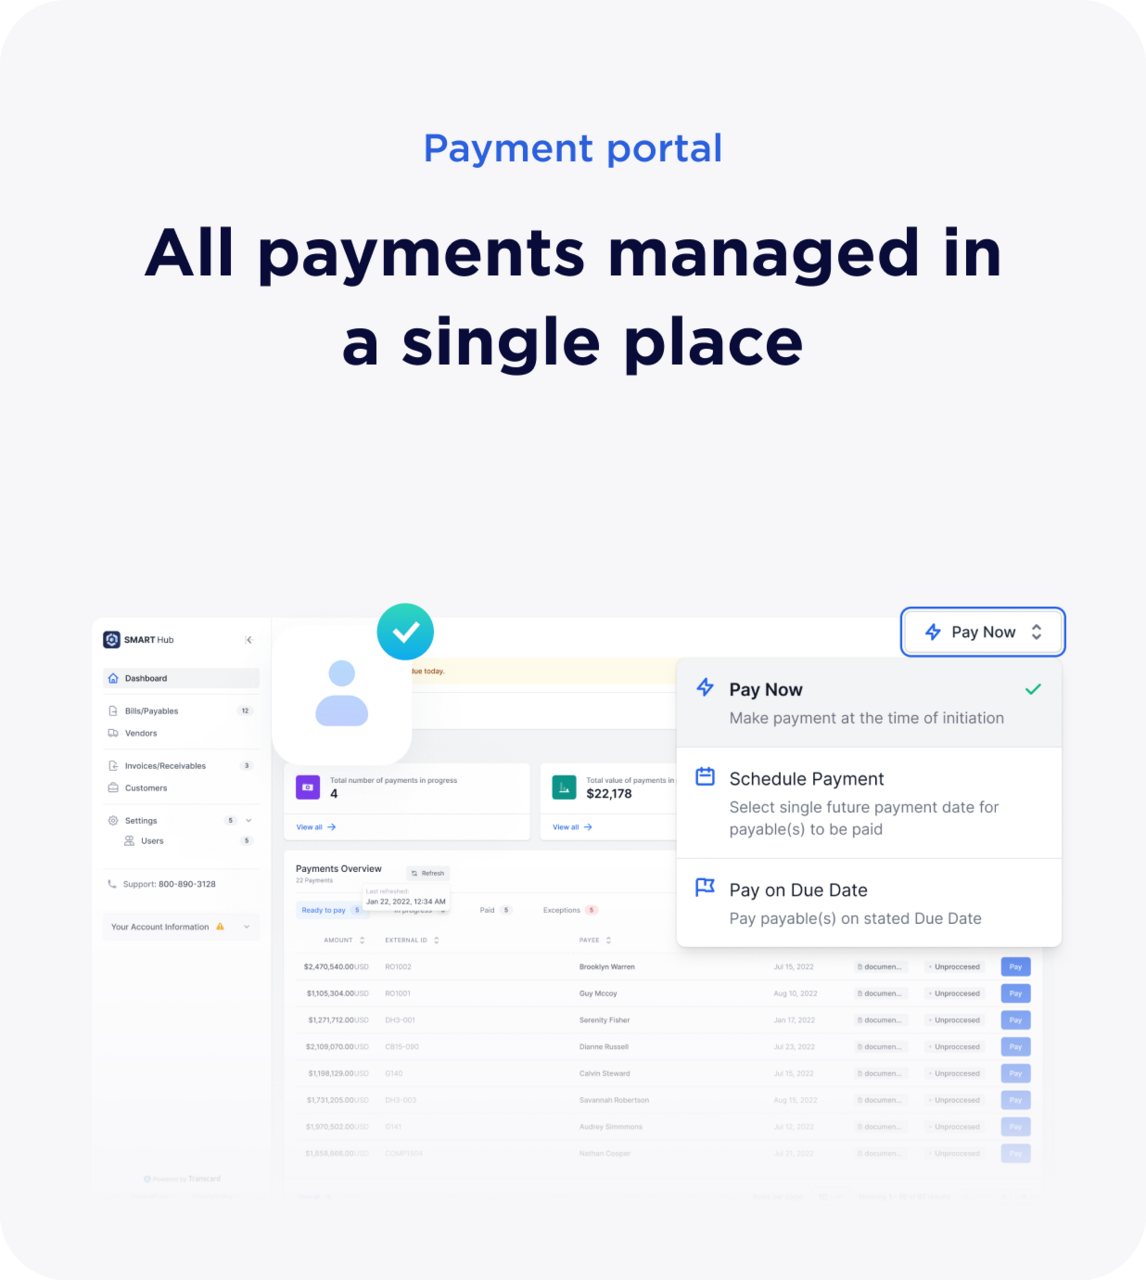 SMART Suite Payment Portal - Manage Payments in a Single Place.